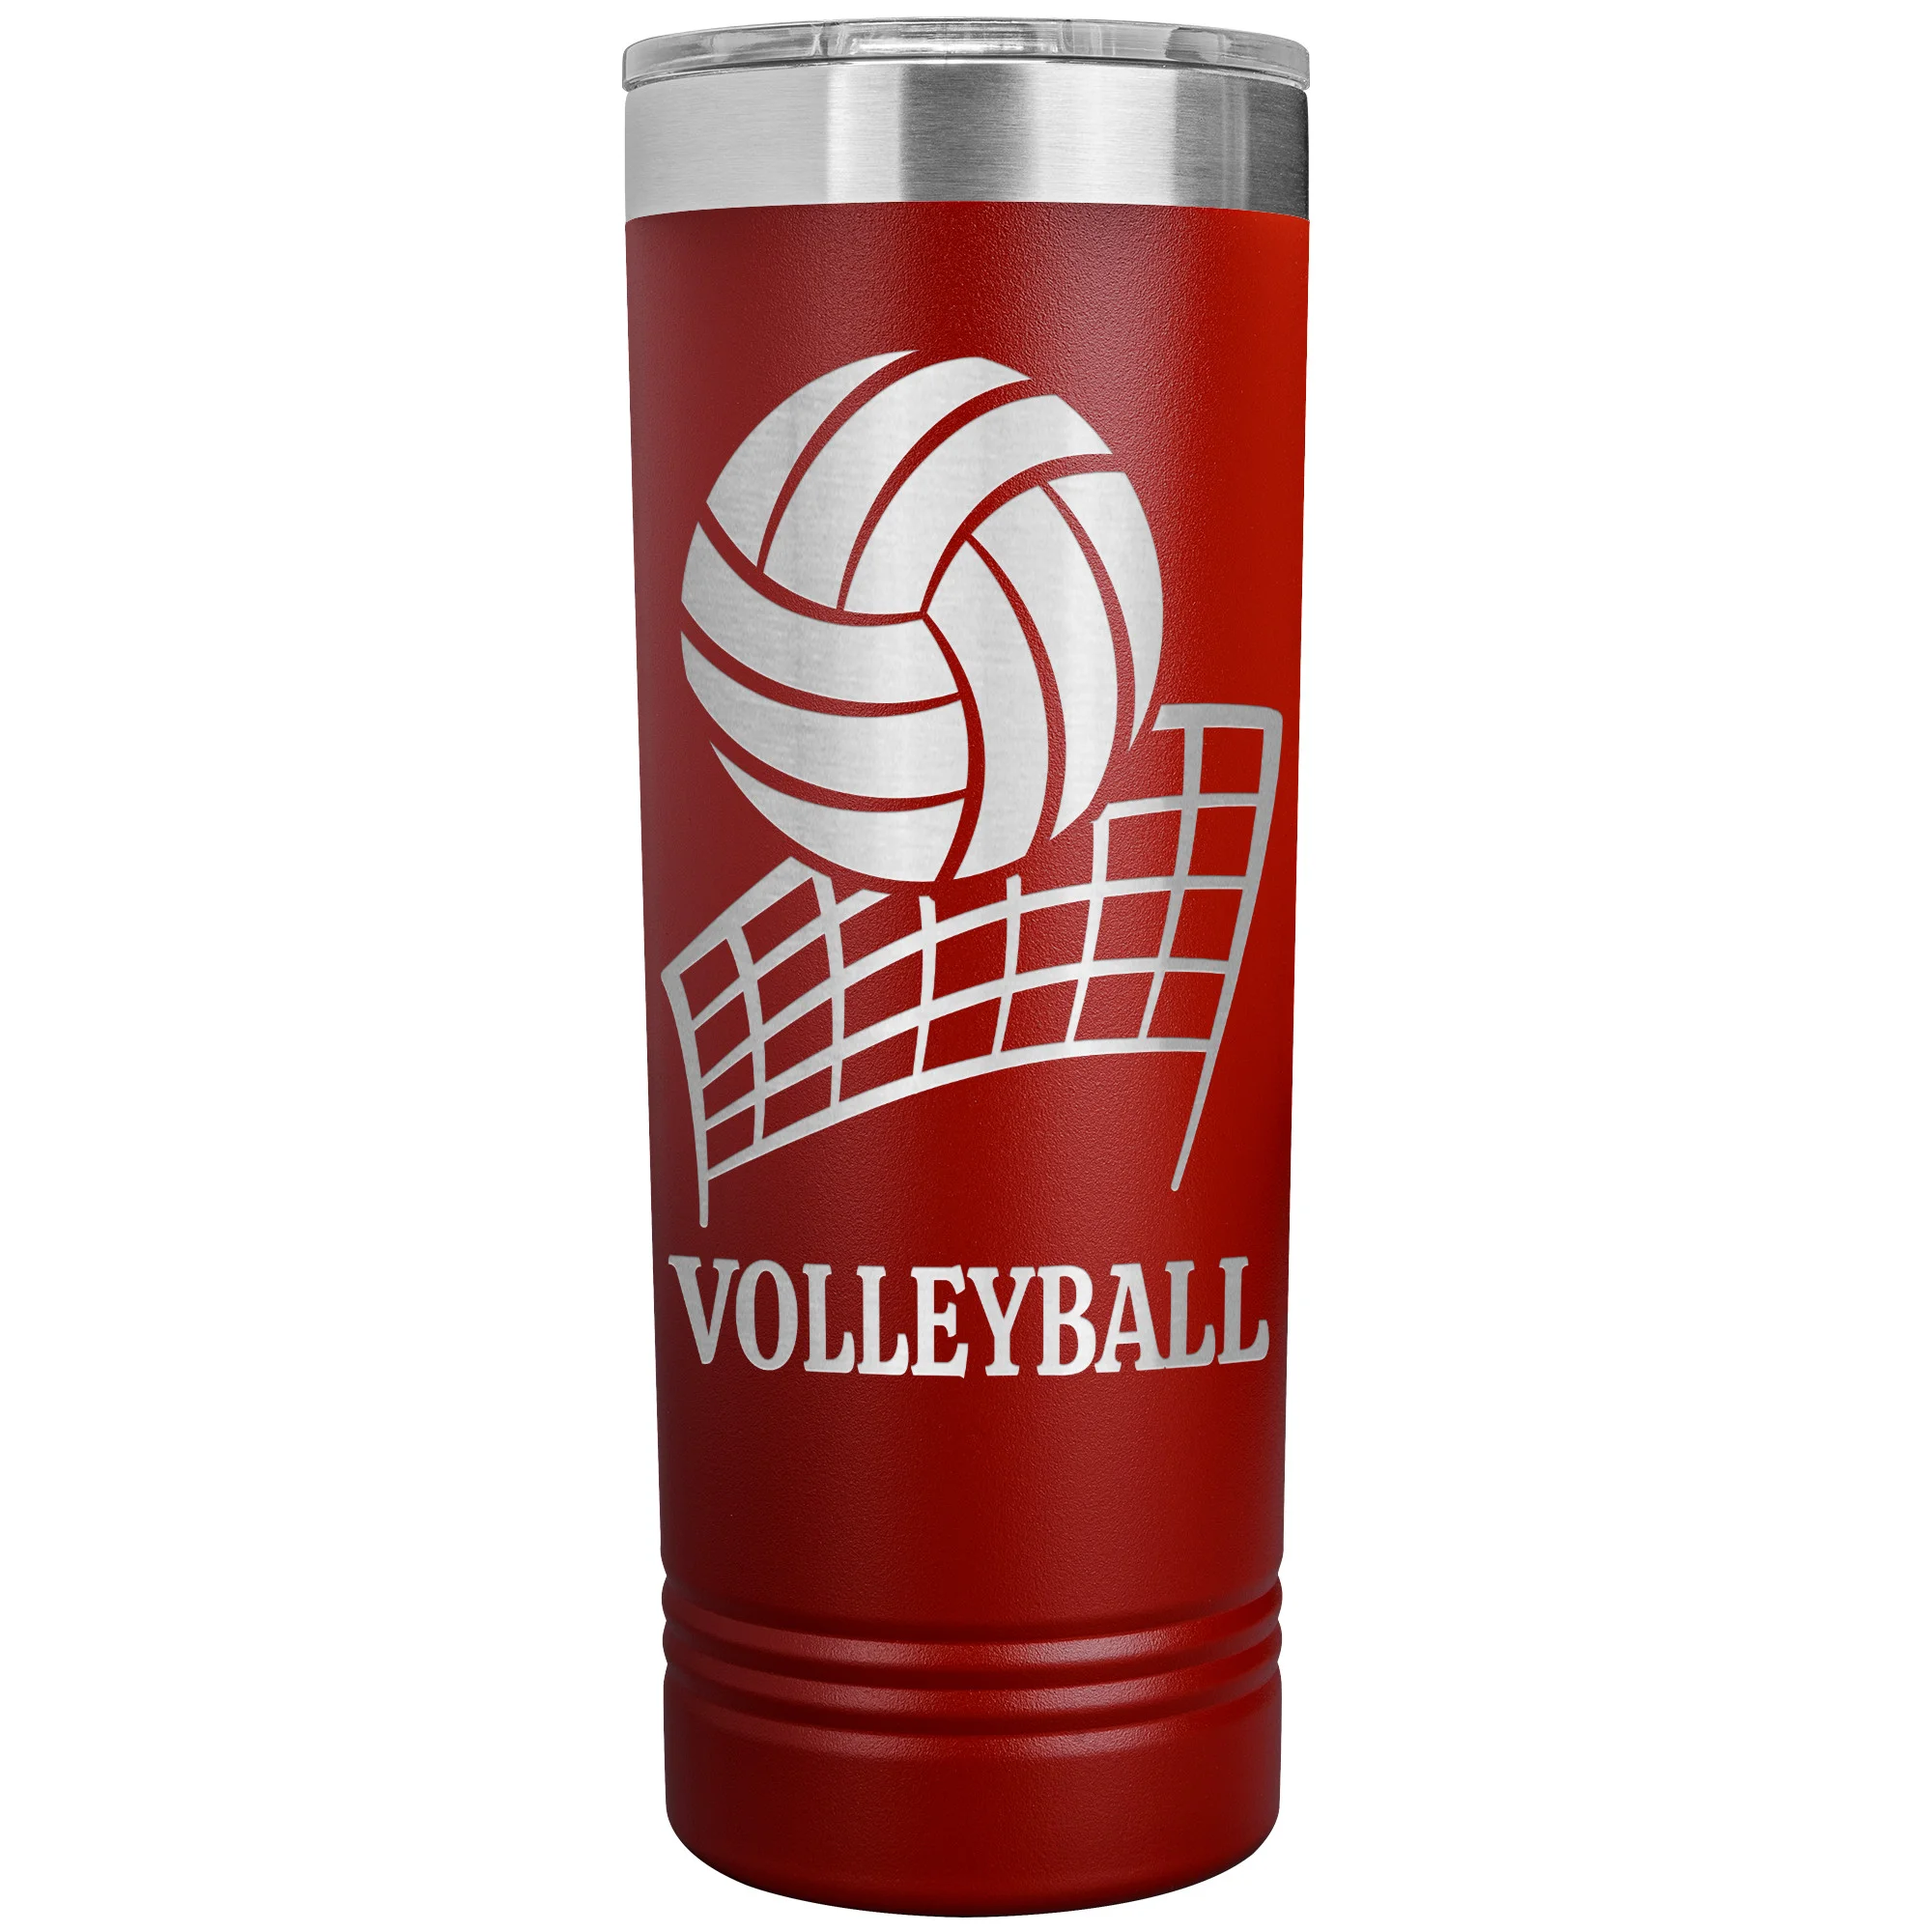 Custom Volleyball Water Bottle. Personalized Gift for Player/coach